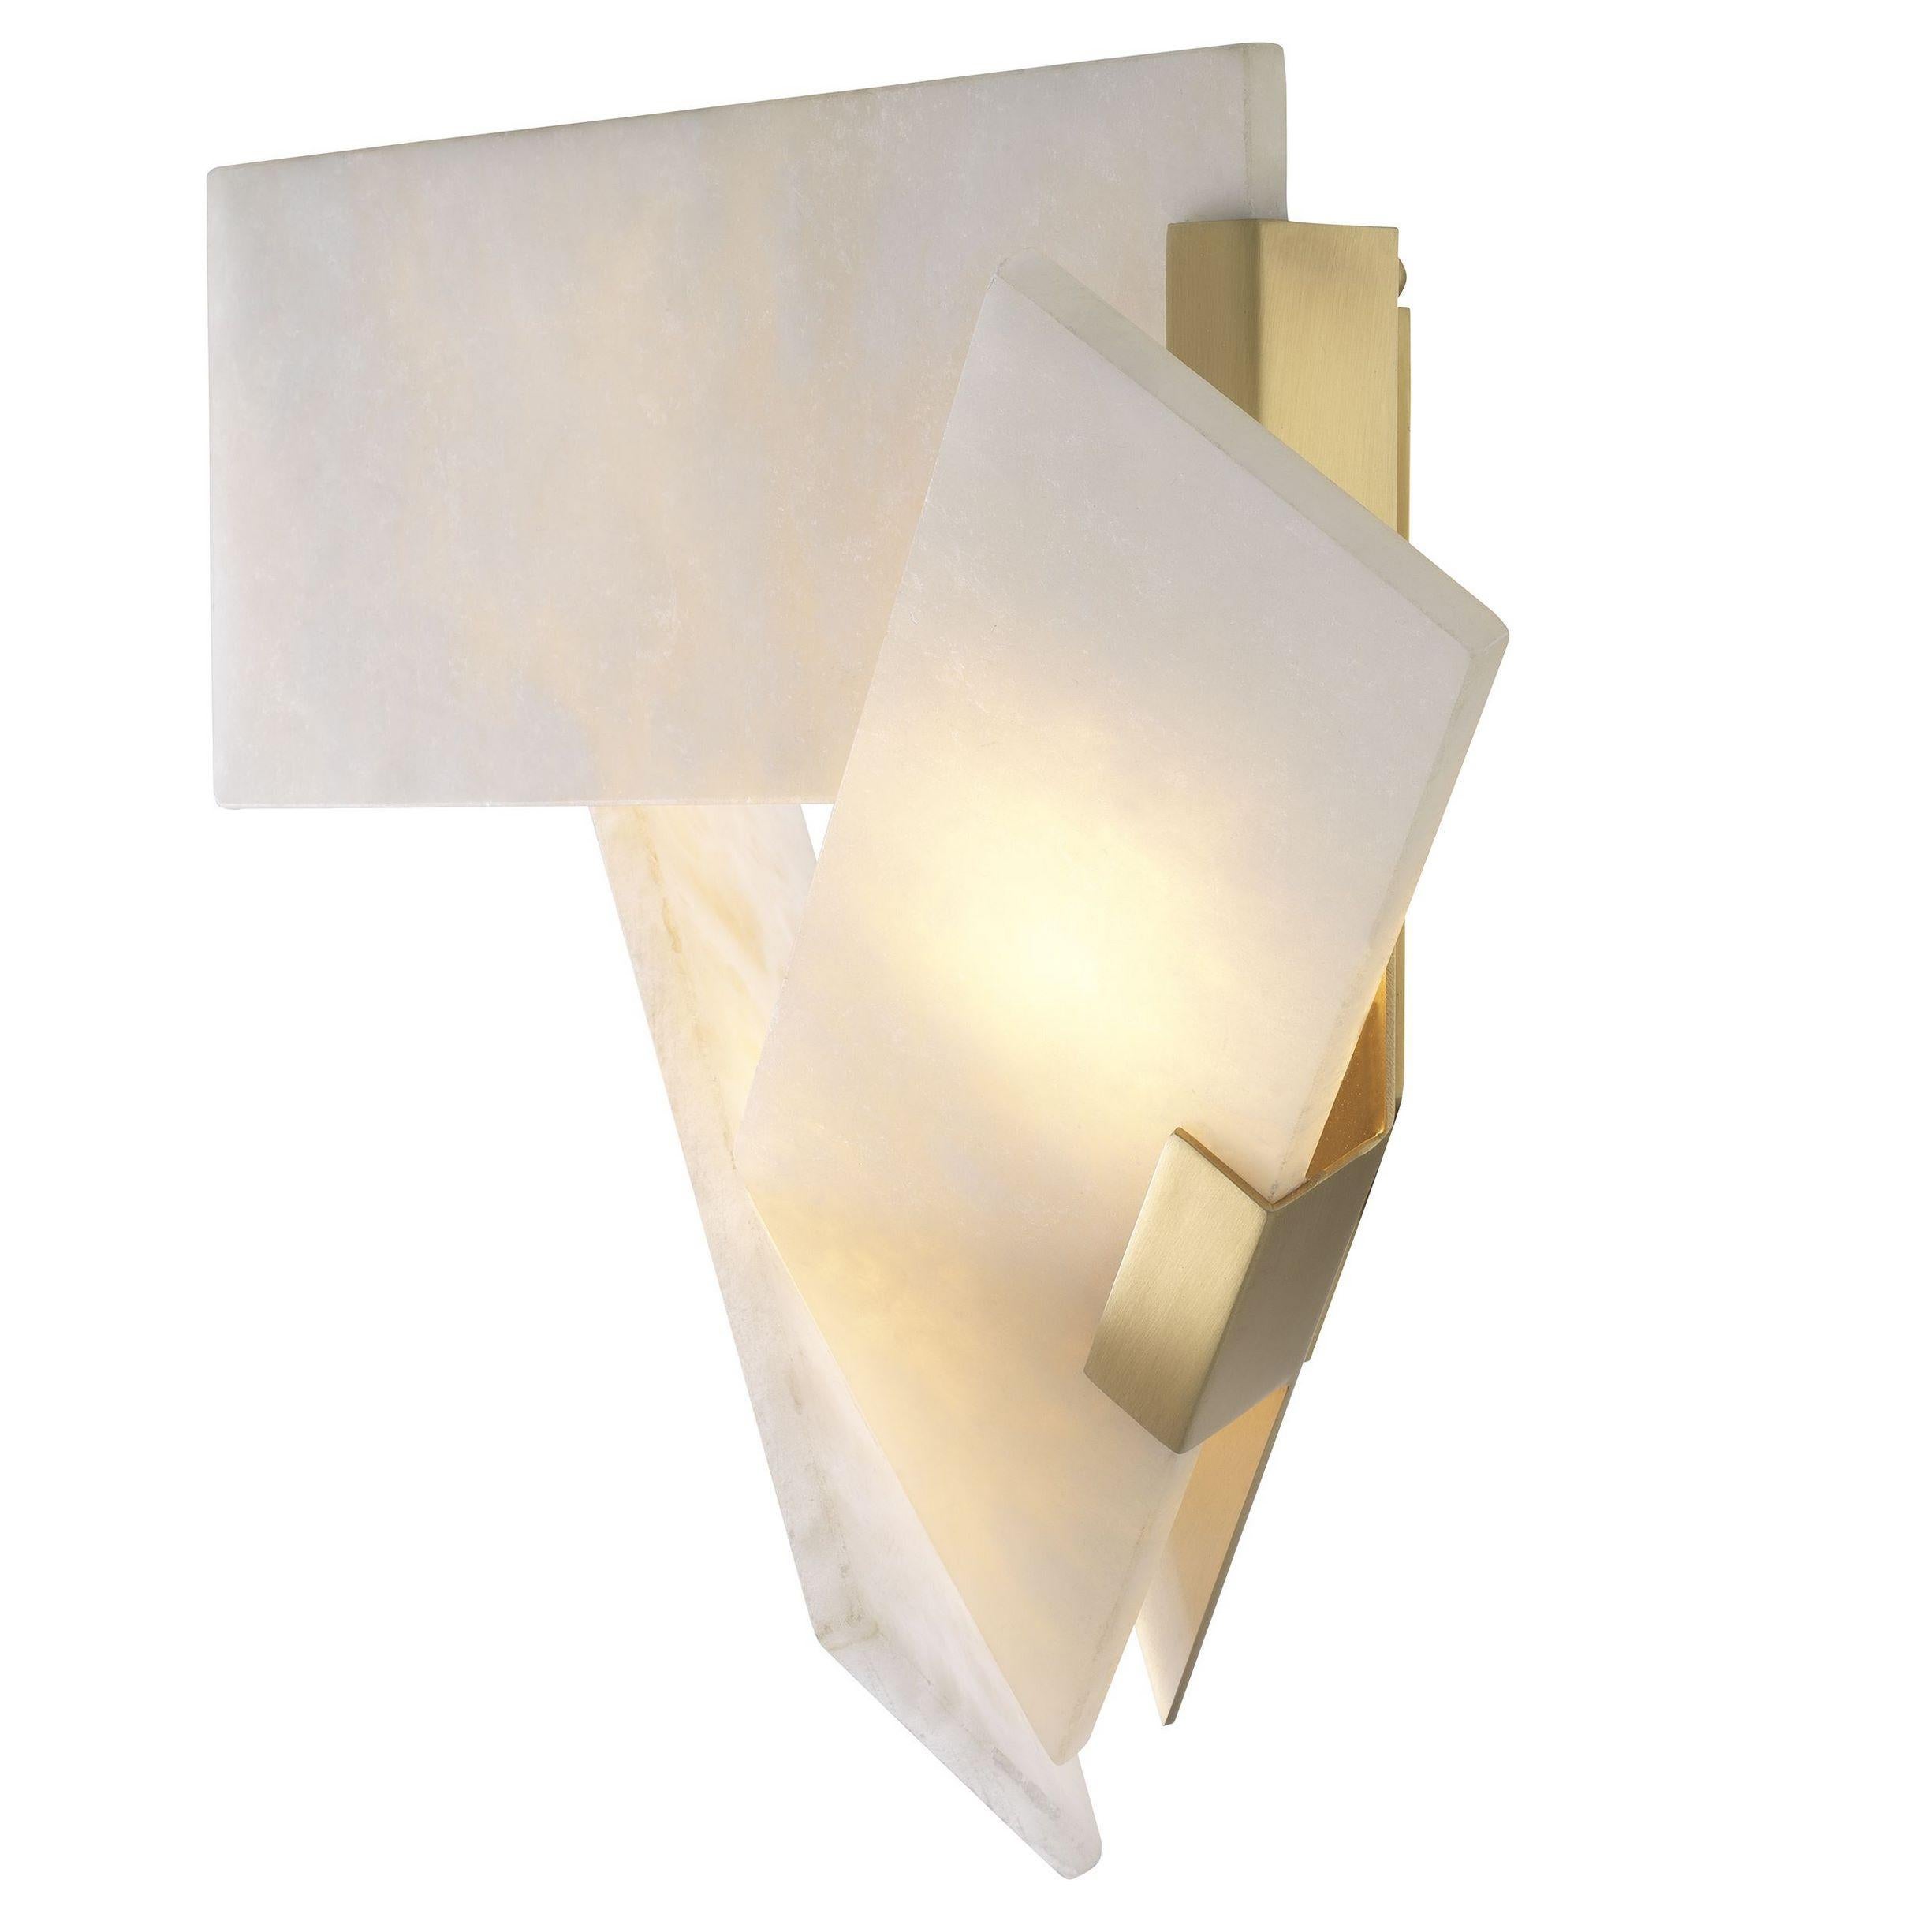 Brass and white alabaster wall light, elegant, presence and class all in transparency. New item, never used.